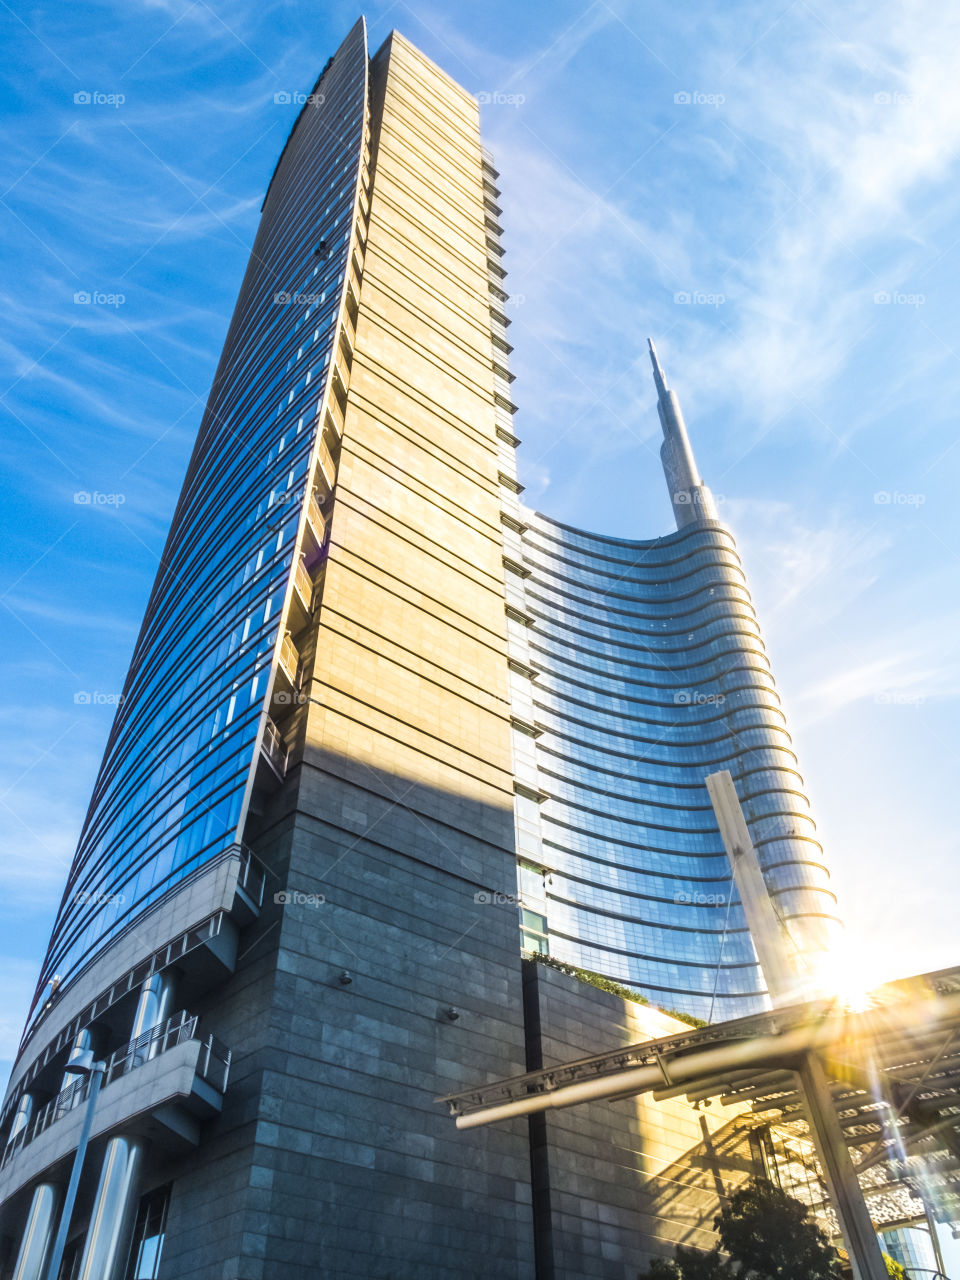 The UniCredit Tower (Torre UniCredit) is a skyscraper in Milan, Italy. At 231 metres (758 ft), it is the tallest building in Italy. 